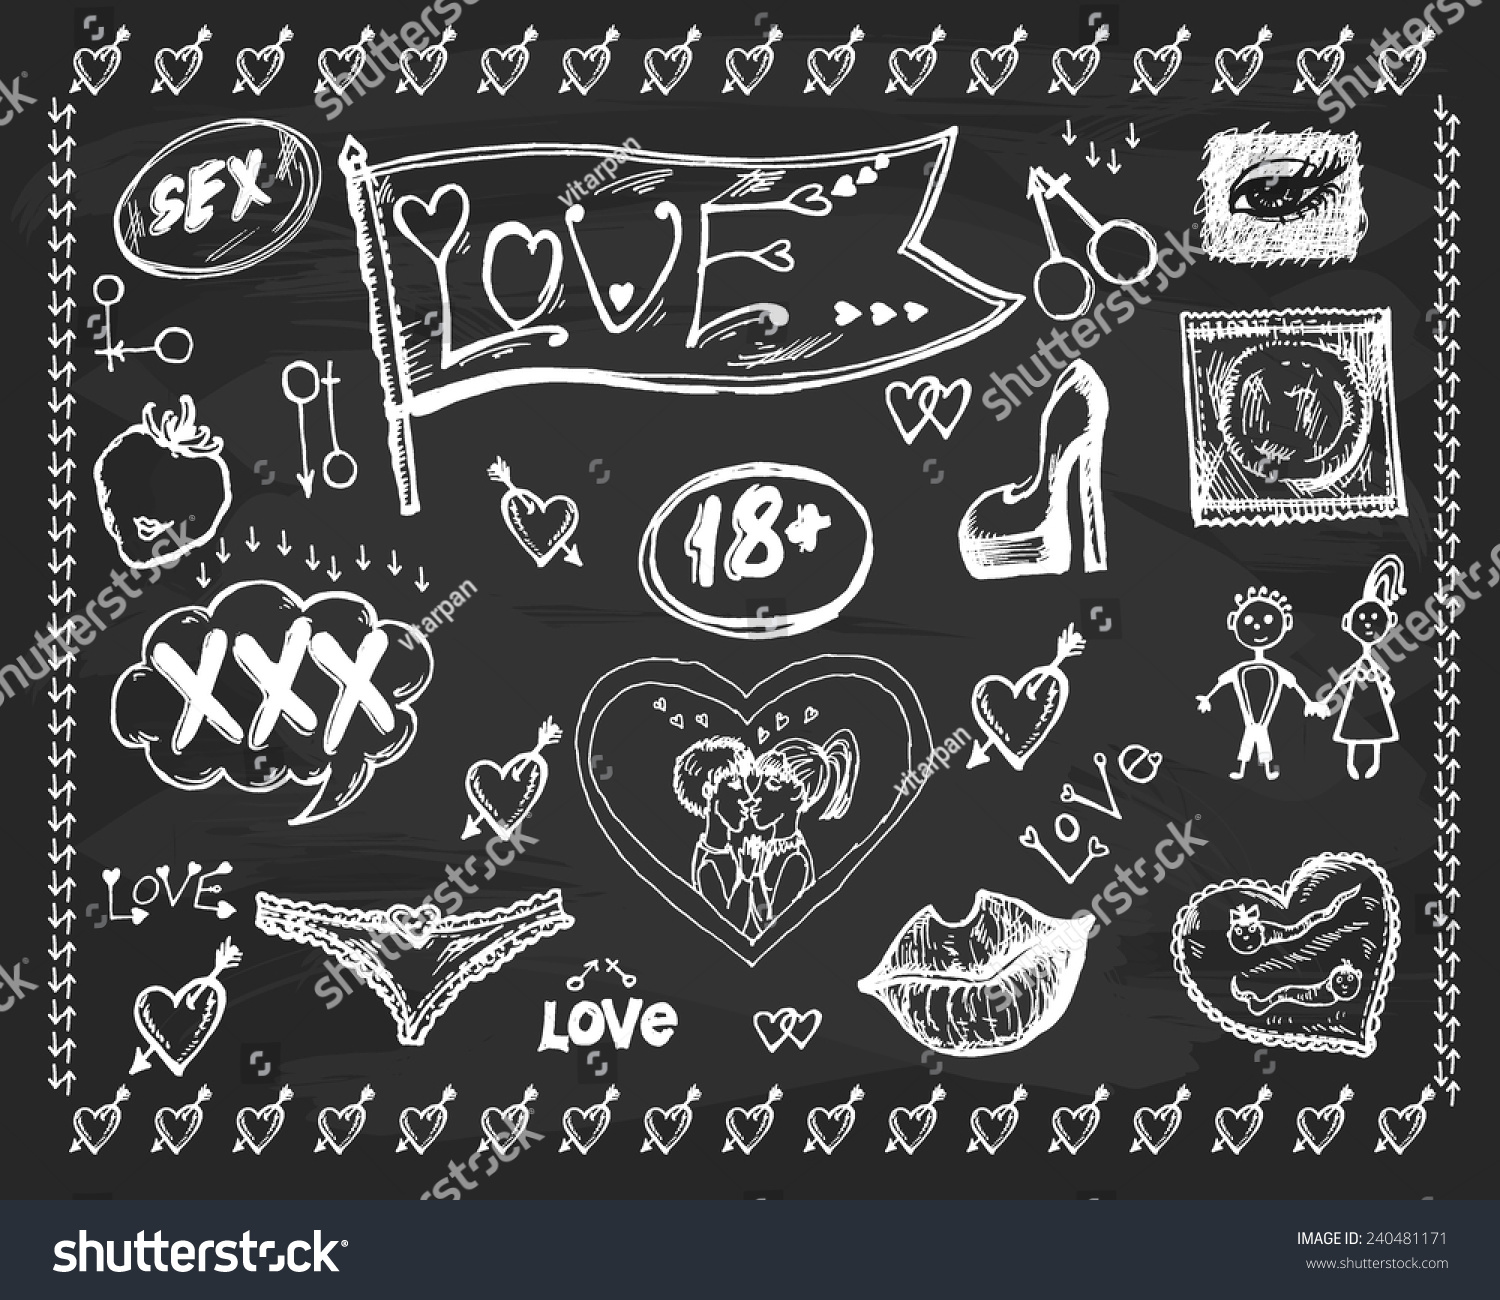 Vector Graphic Artistic Stylized Image Set Stock Vector Royalty Free 240481171 8095